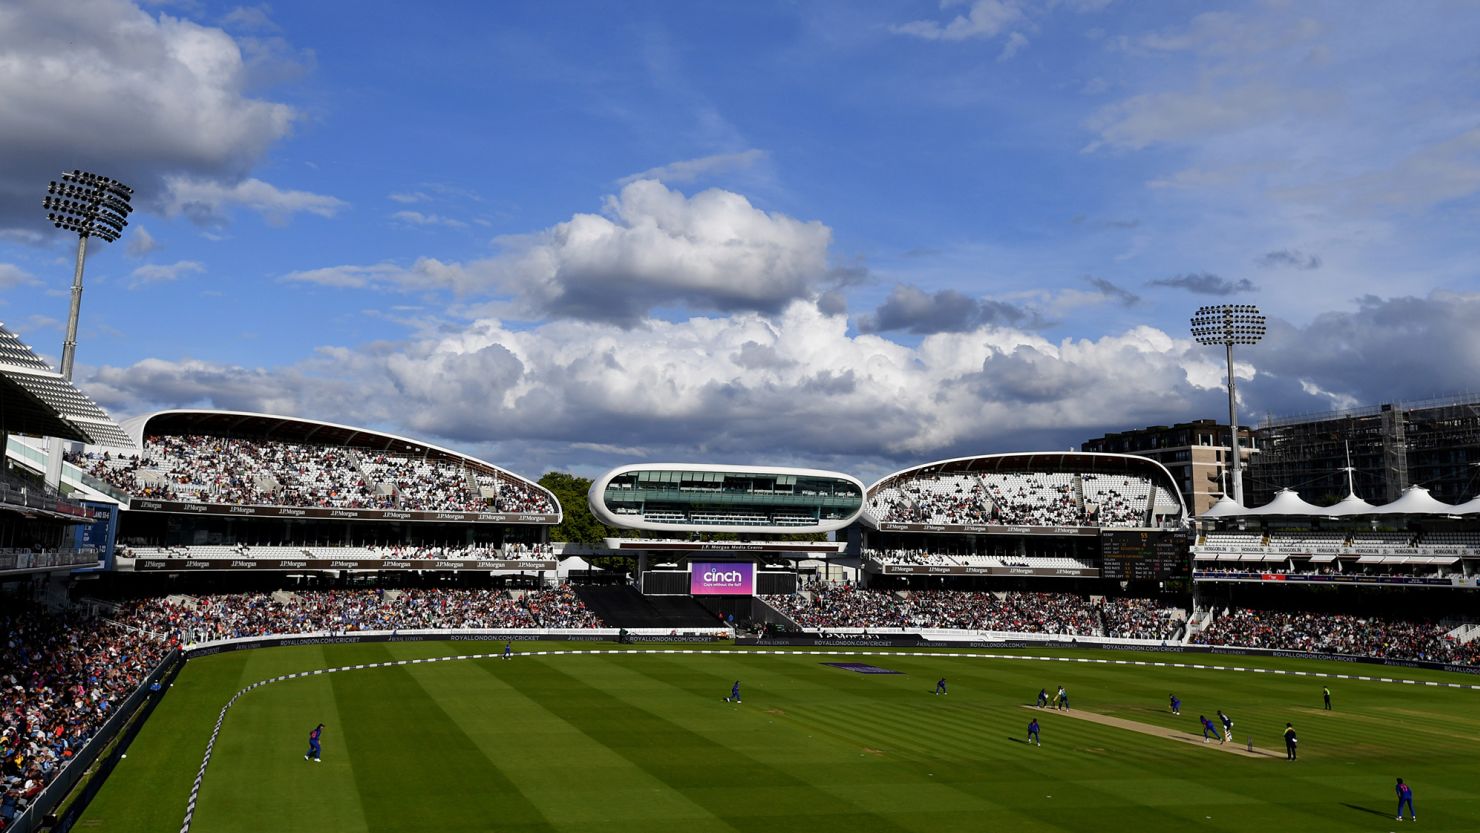 LONDON, ENGLAND - SEPTEMBER 24: A general view of action during the 3rd Royal London ODI match between England and India at Lord's Cricket Ground on September 24, 2022 in London, England. (Photo by Tom Dulat - ECB/ECB via Getty Images)